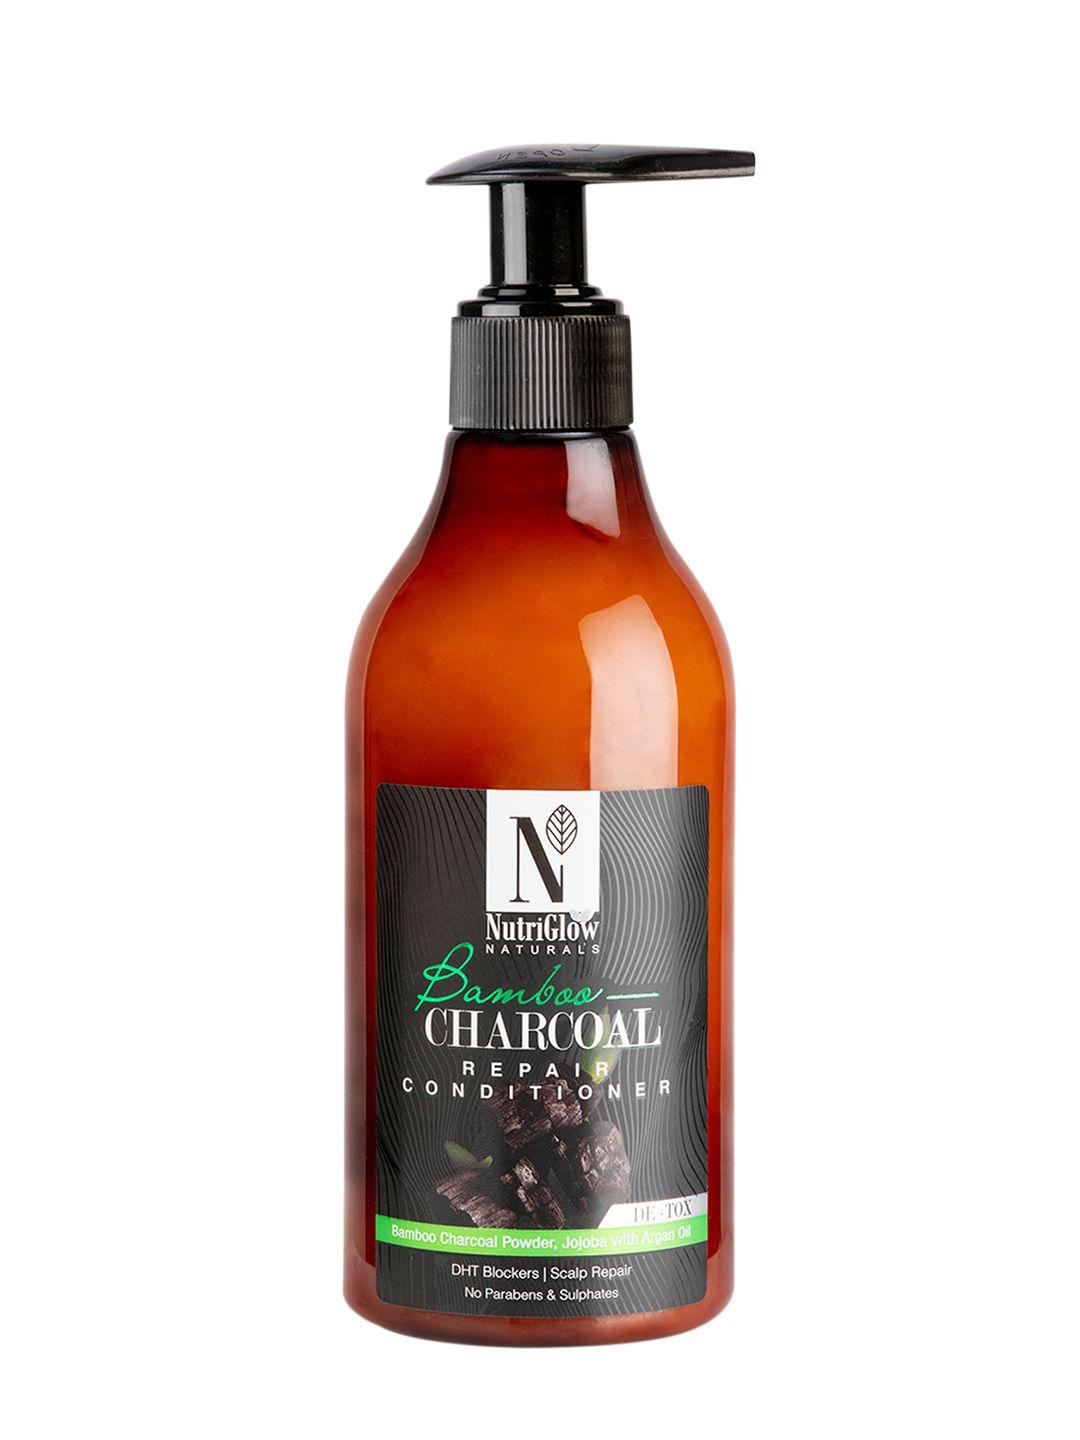 nutriglow naturals sustainable bamboo charcoal repair conditioner with charcoal powder 300 ml